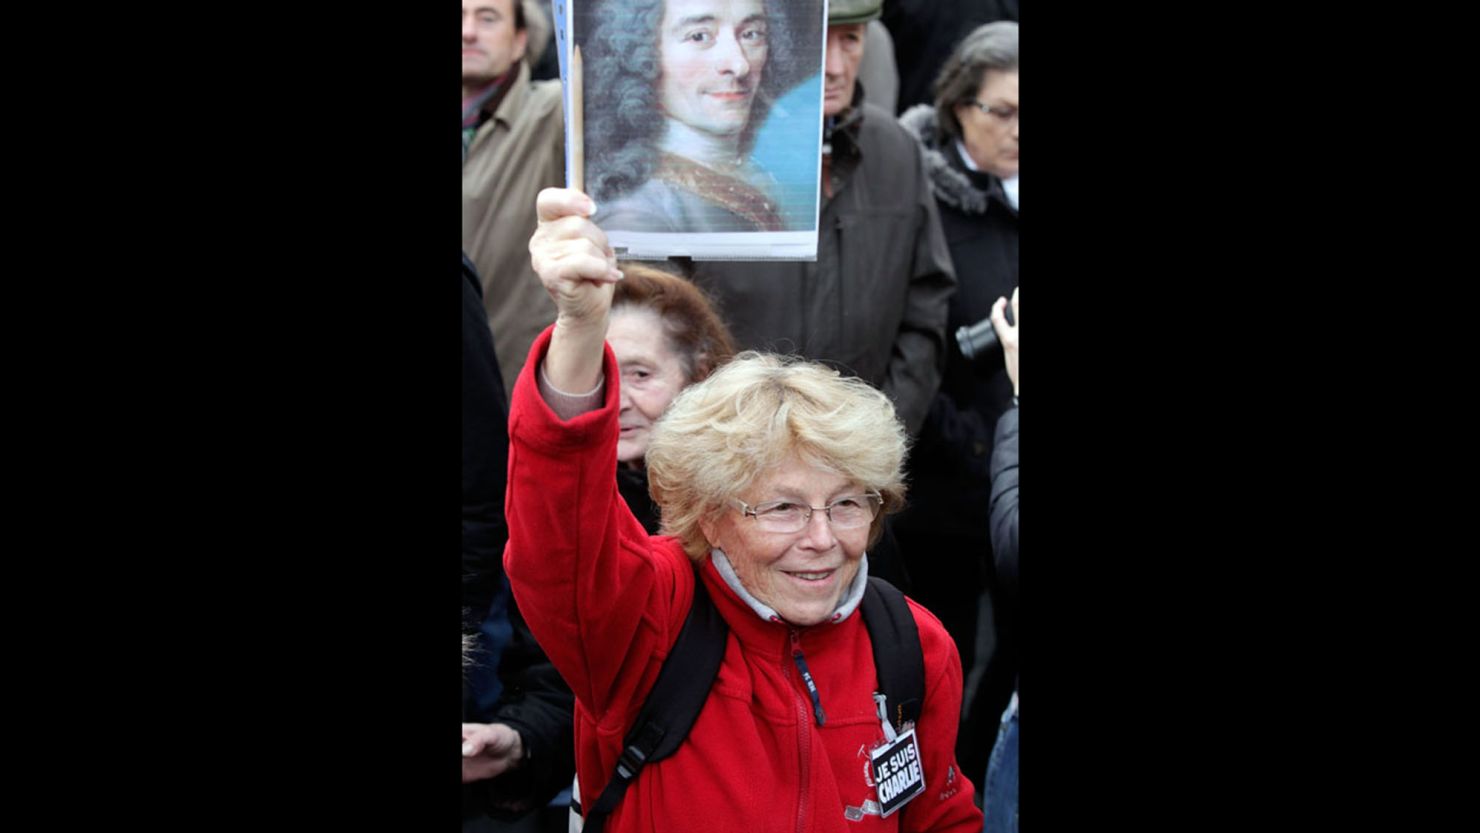 A demonstrator last week on the boulevard named for Voltaire carries a poster of the author.
